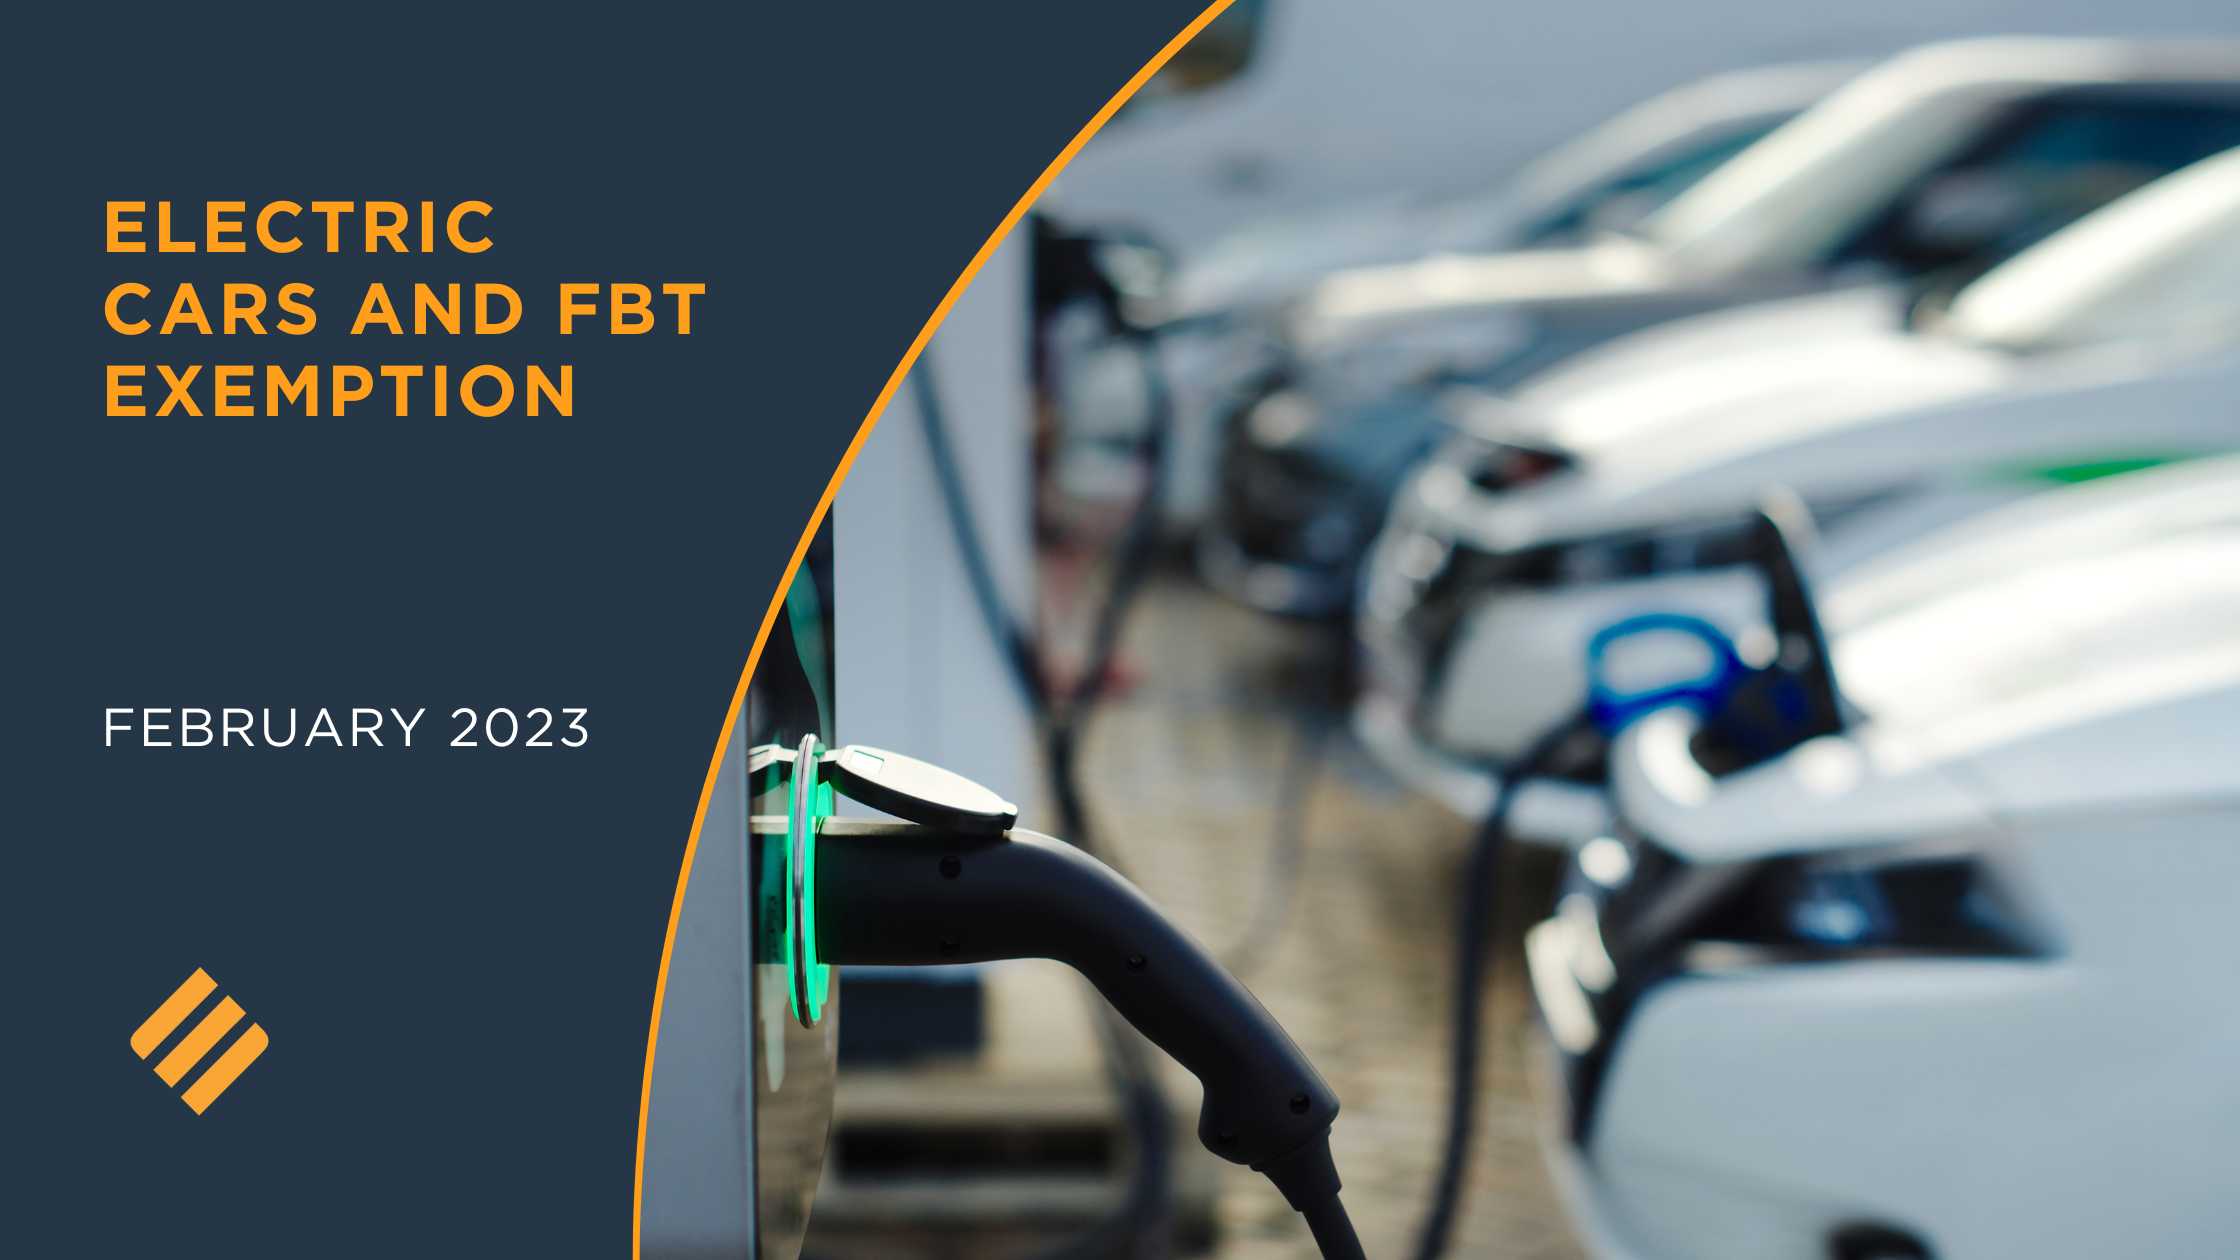 Electric Cars and FBT exemption